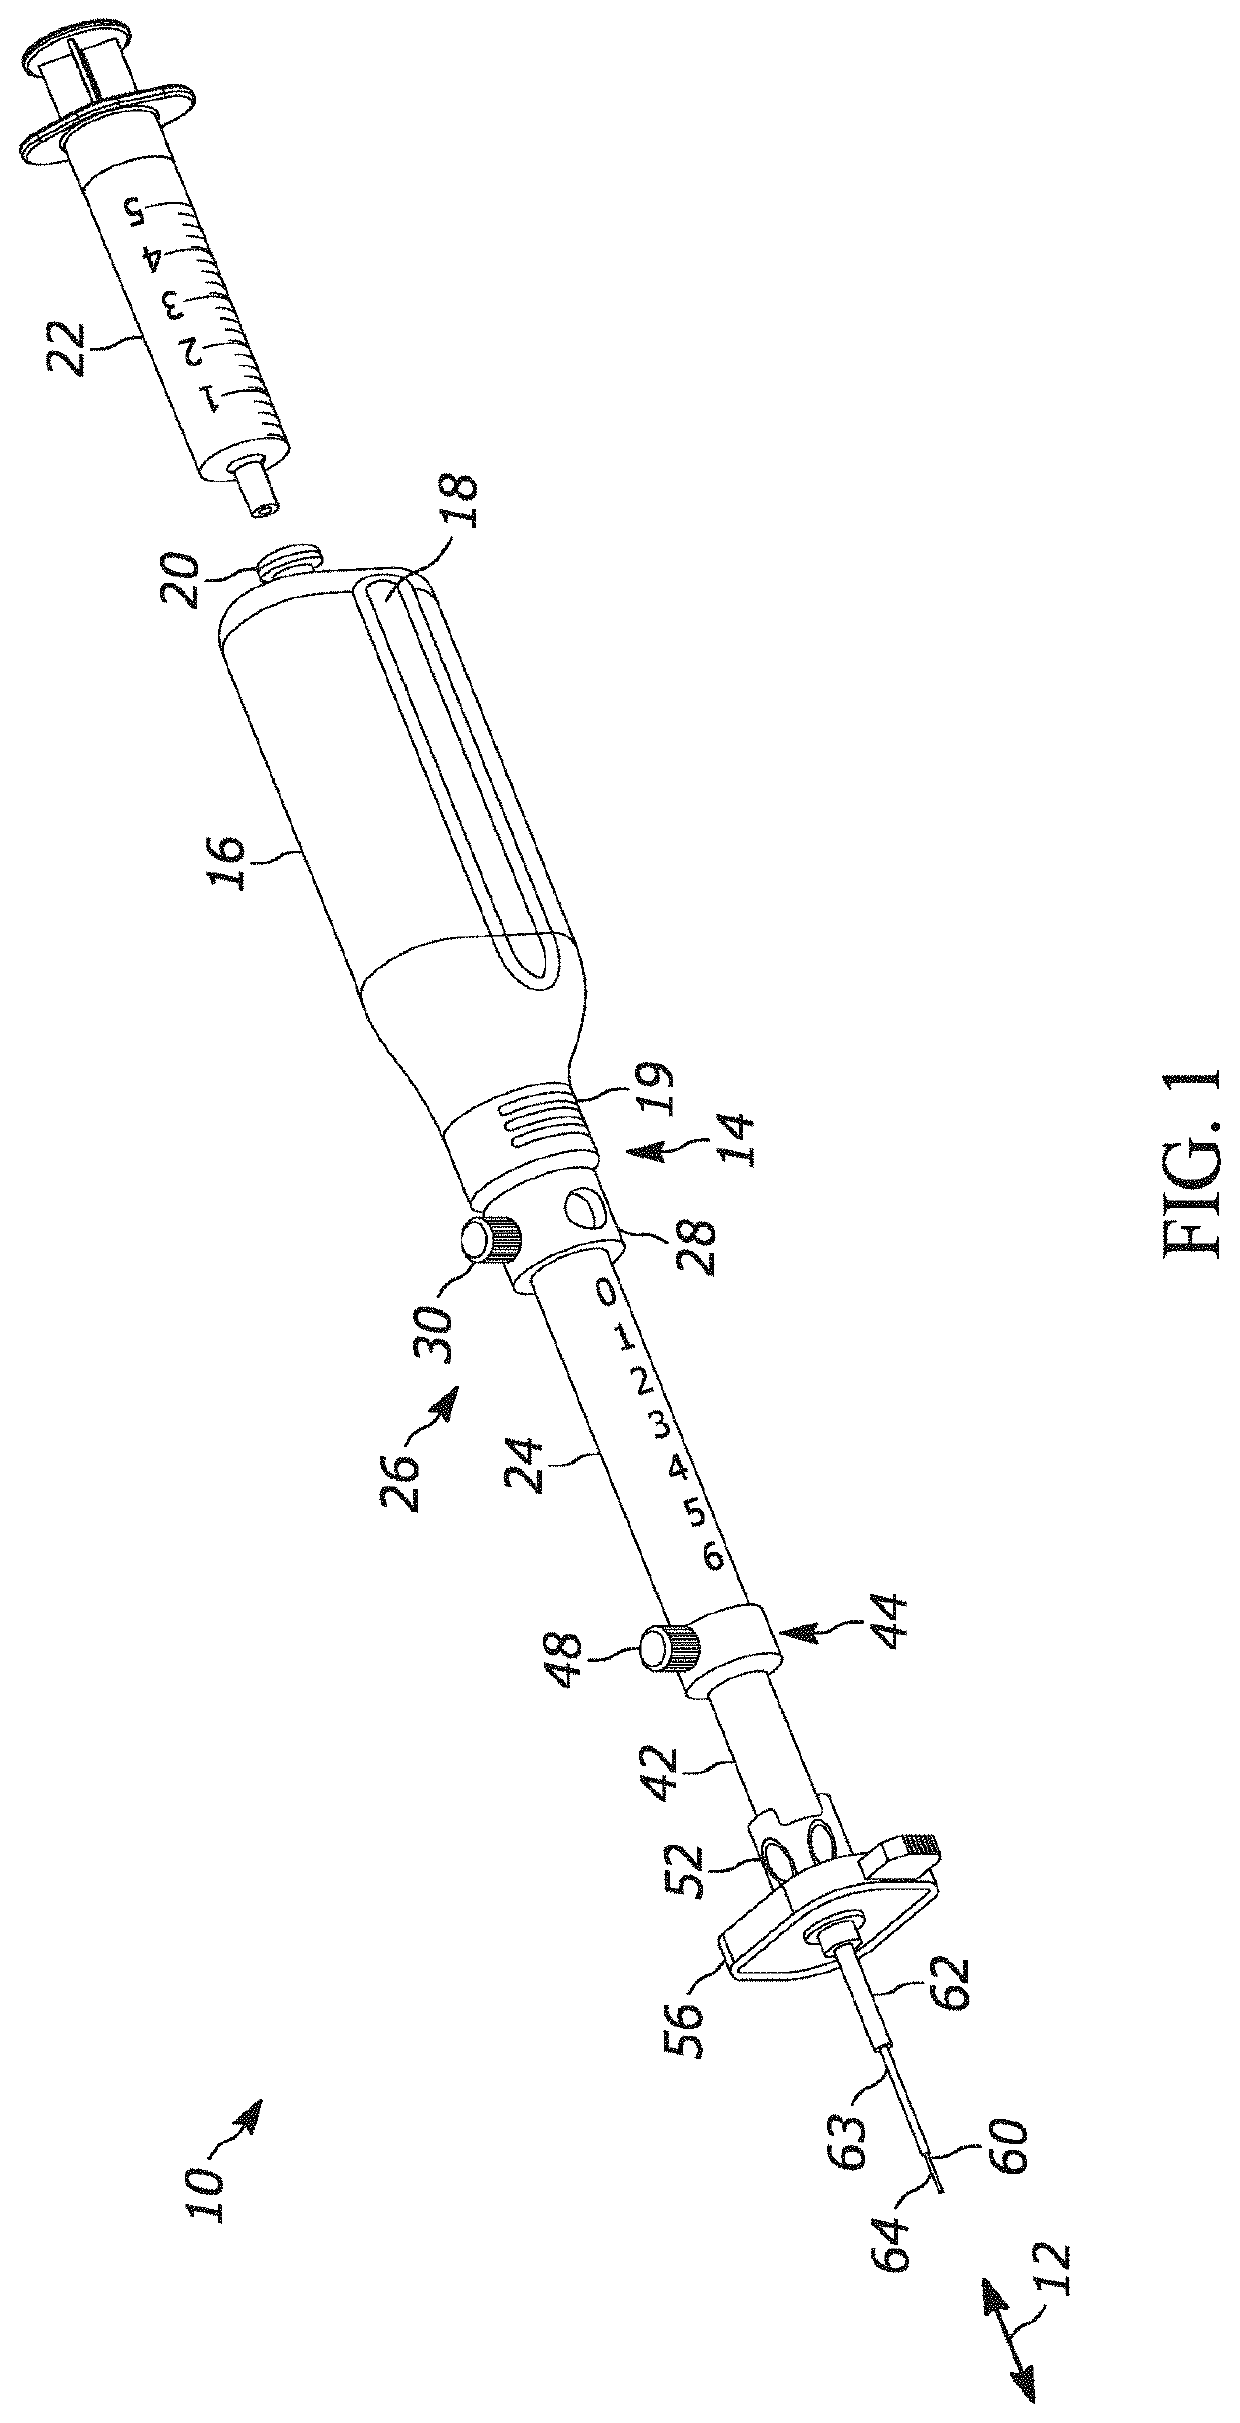 Telescoping needle assembly with side cutting needle